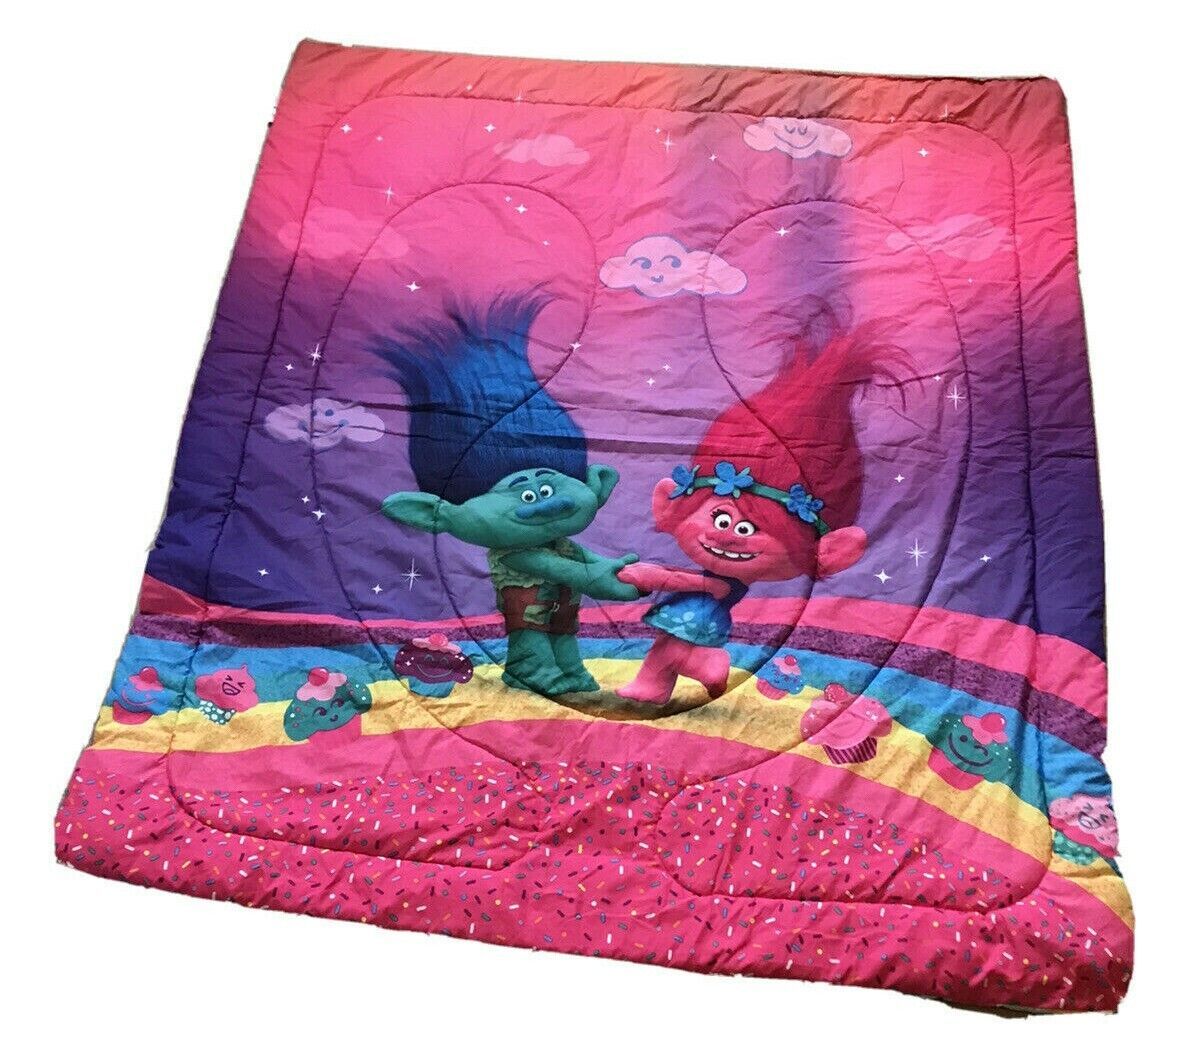 Trolls Reversible Quilted Bedspread 74 x 88” Dreamworks  - $24.99